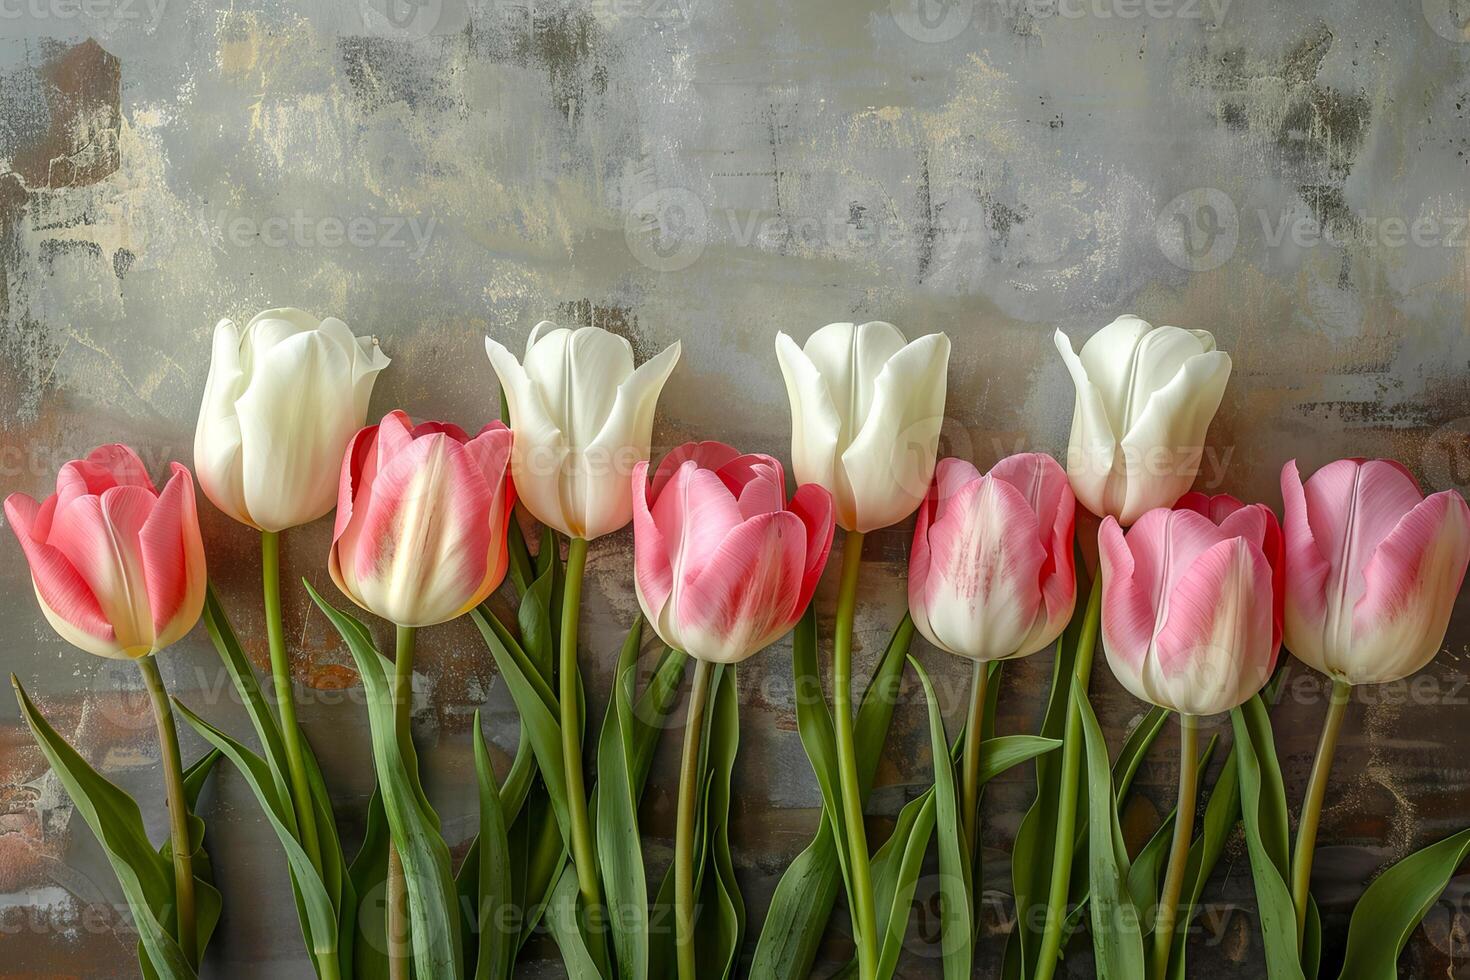 A row of elegant pink and white tulips aligned gracefully against a textured backdrop, capturing the beauty of spring blooms photo